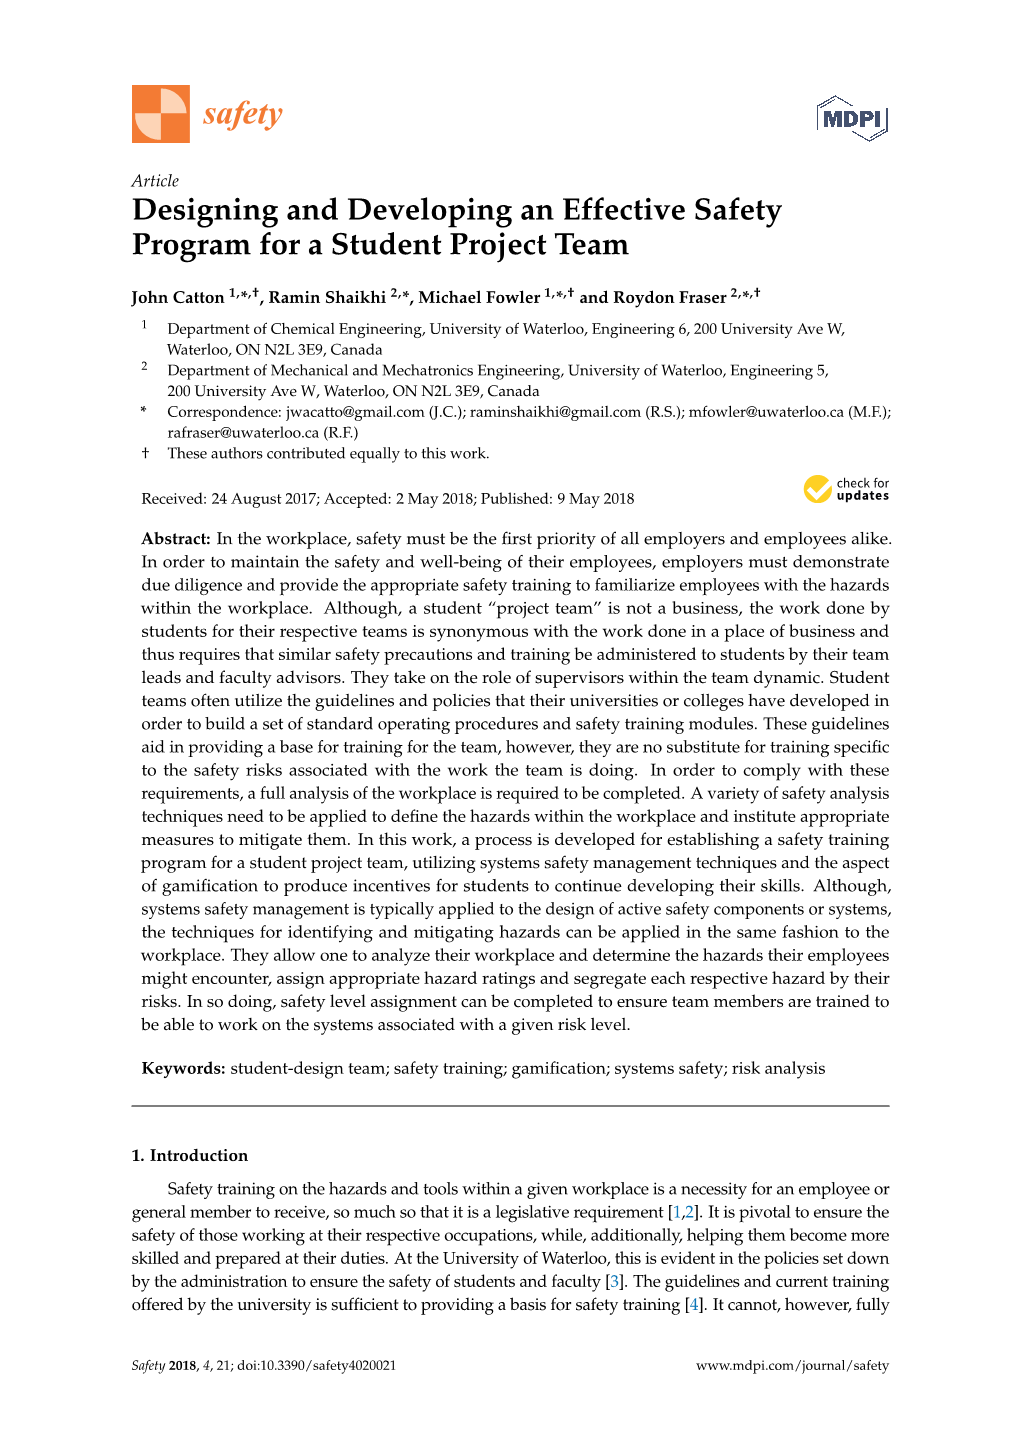 Designing and Developing an Effective Safety Program for a Student Project Team